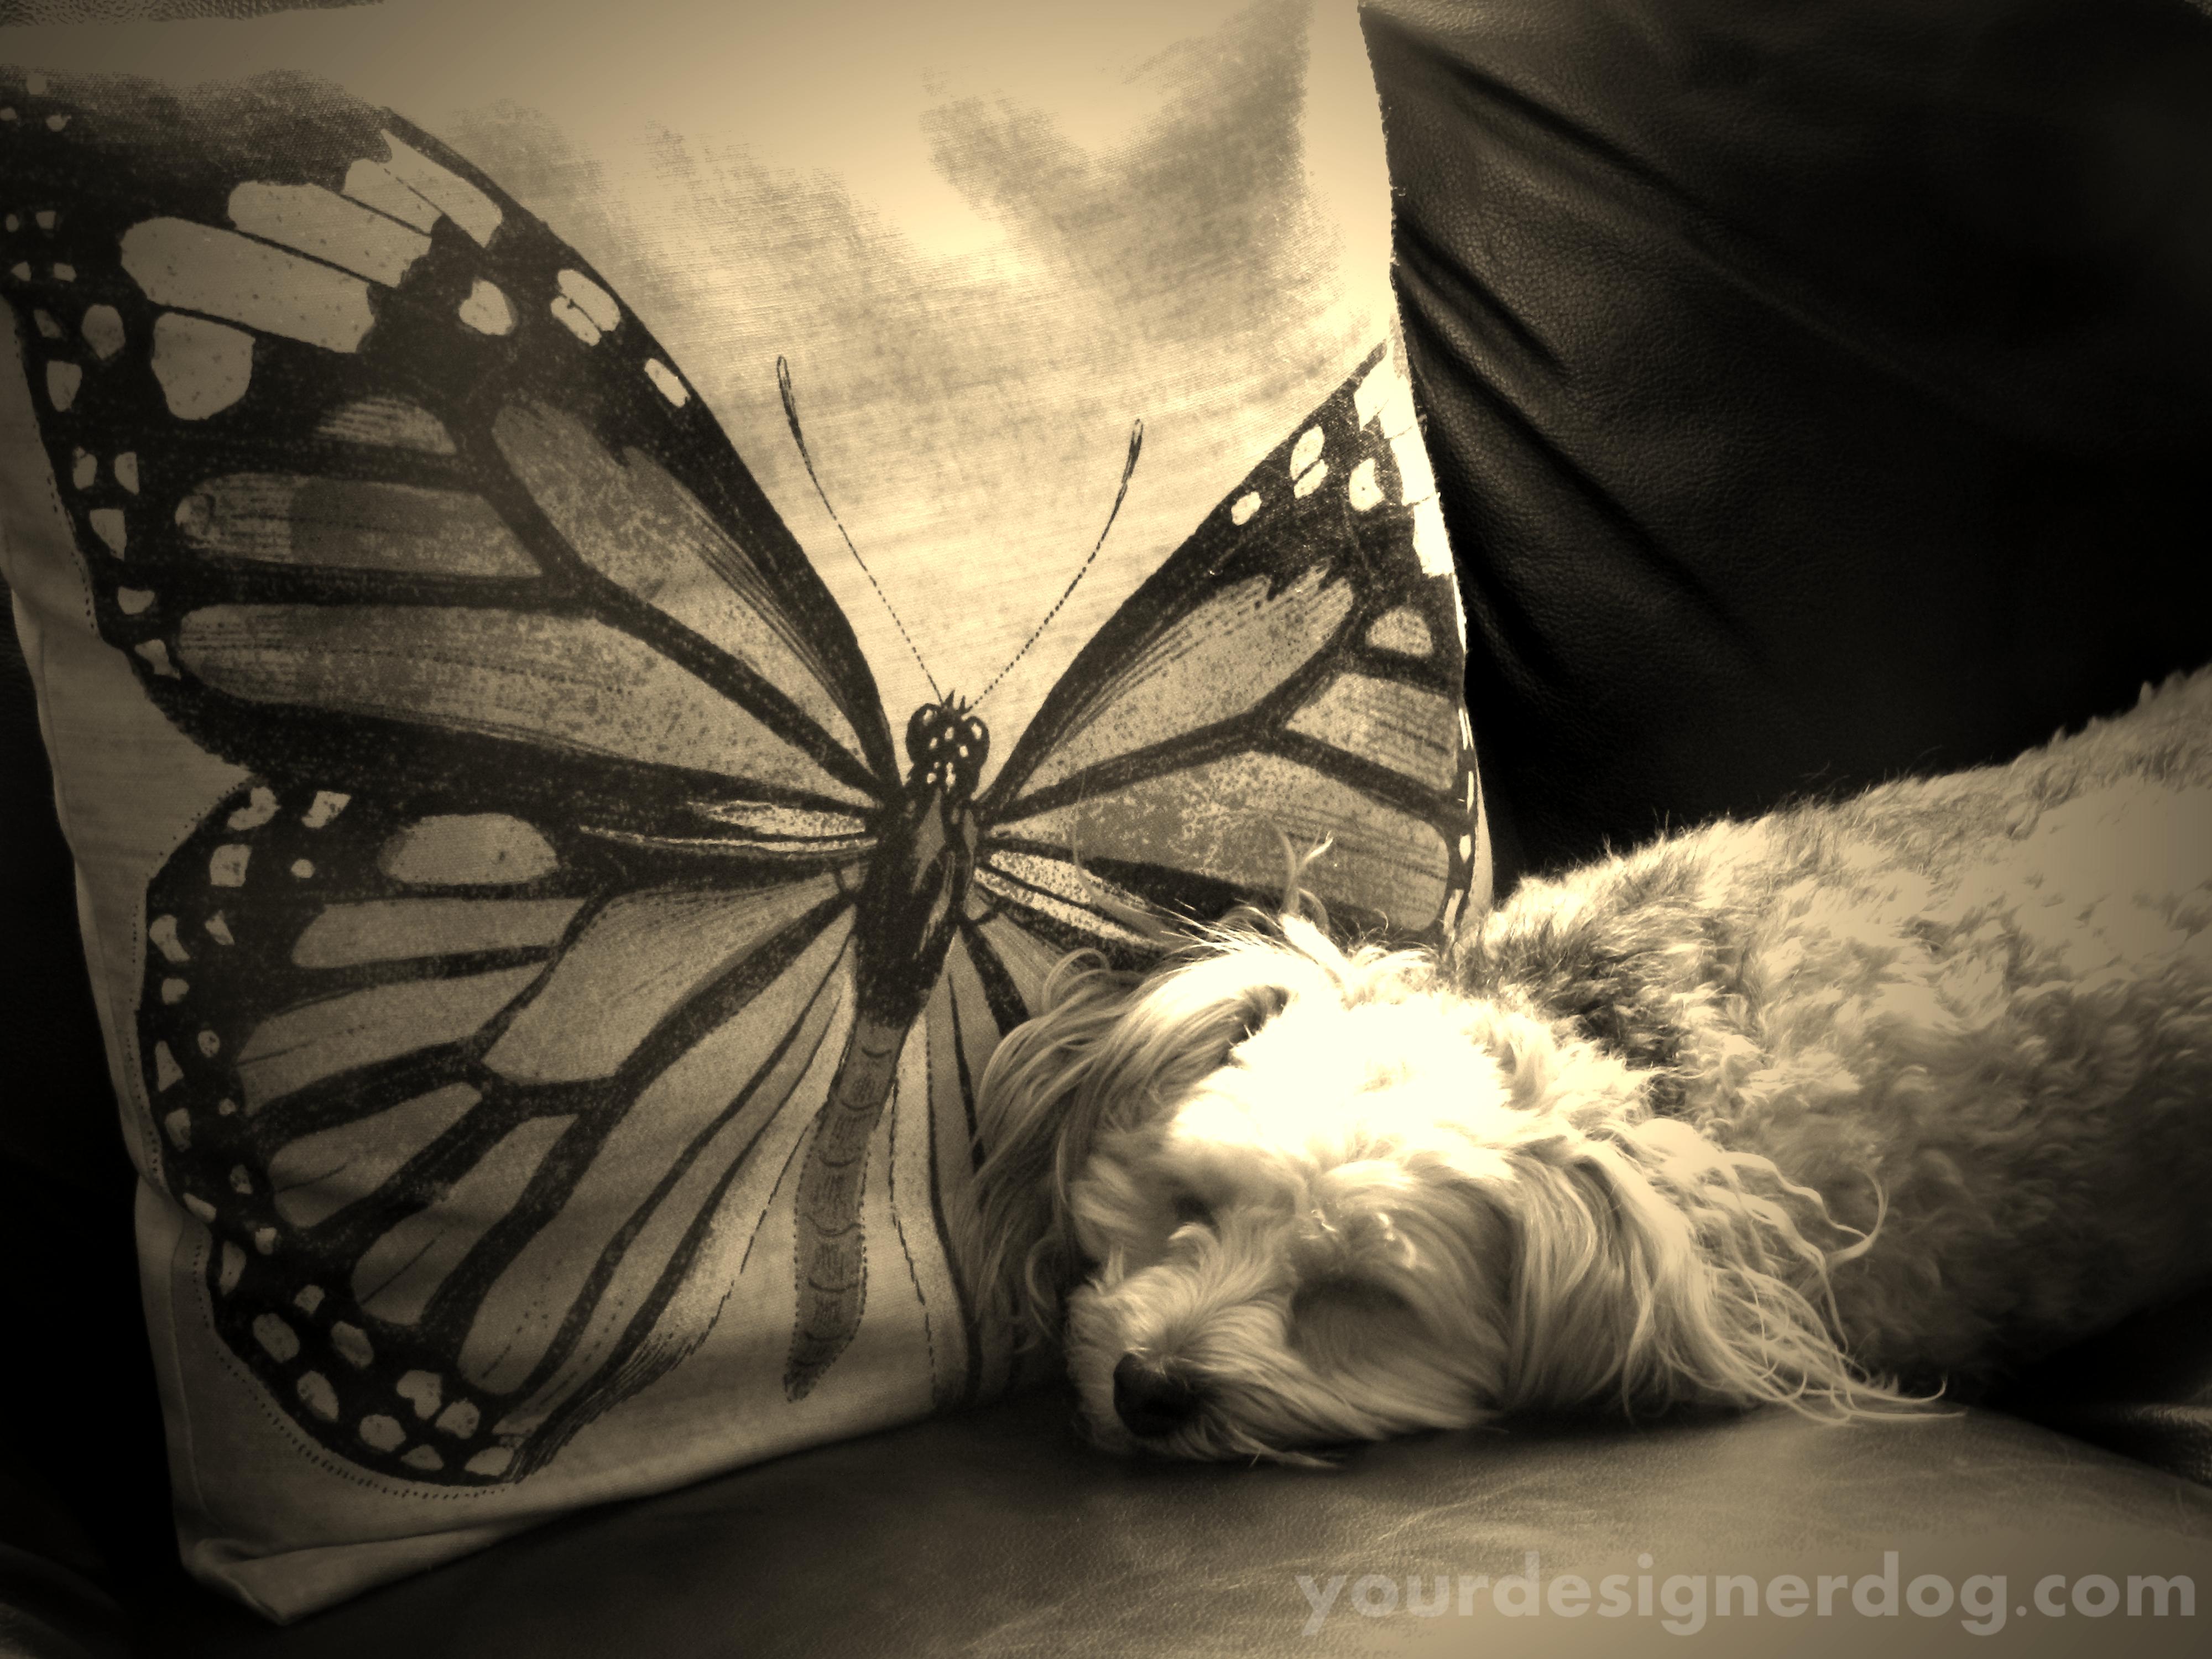 dogs, designer dogs, yorkipoo, yorkie poo, butterfly, dreaming, sleepy puppy, sepia photography